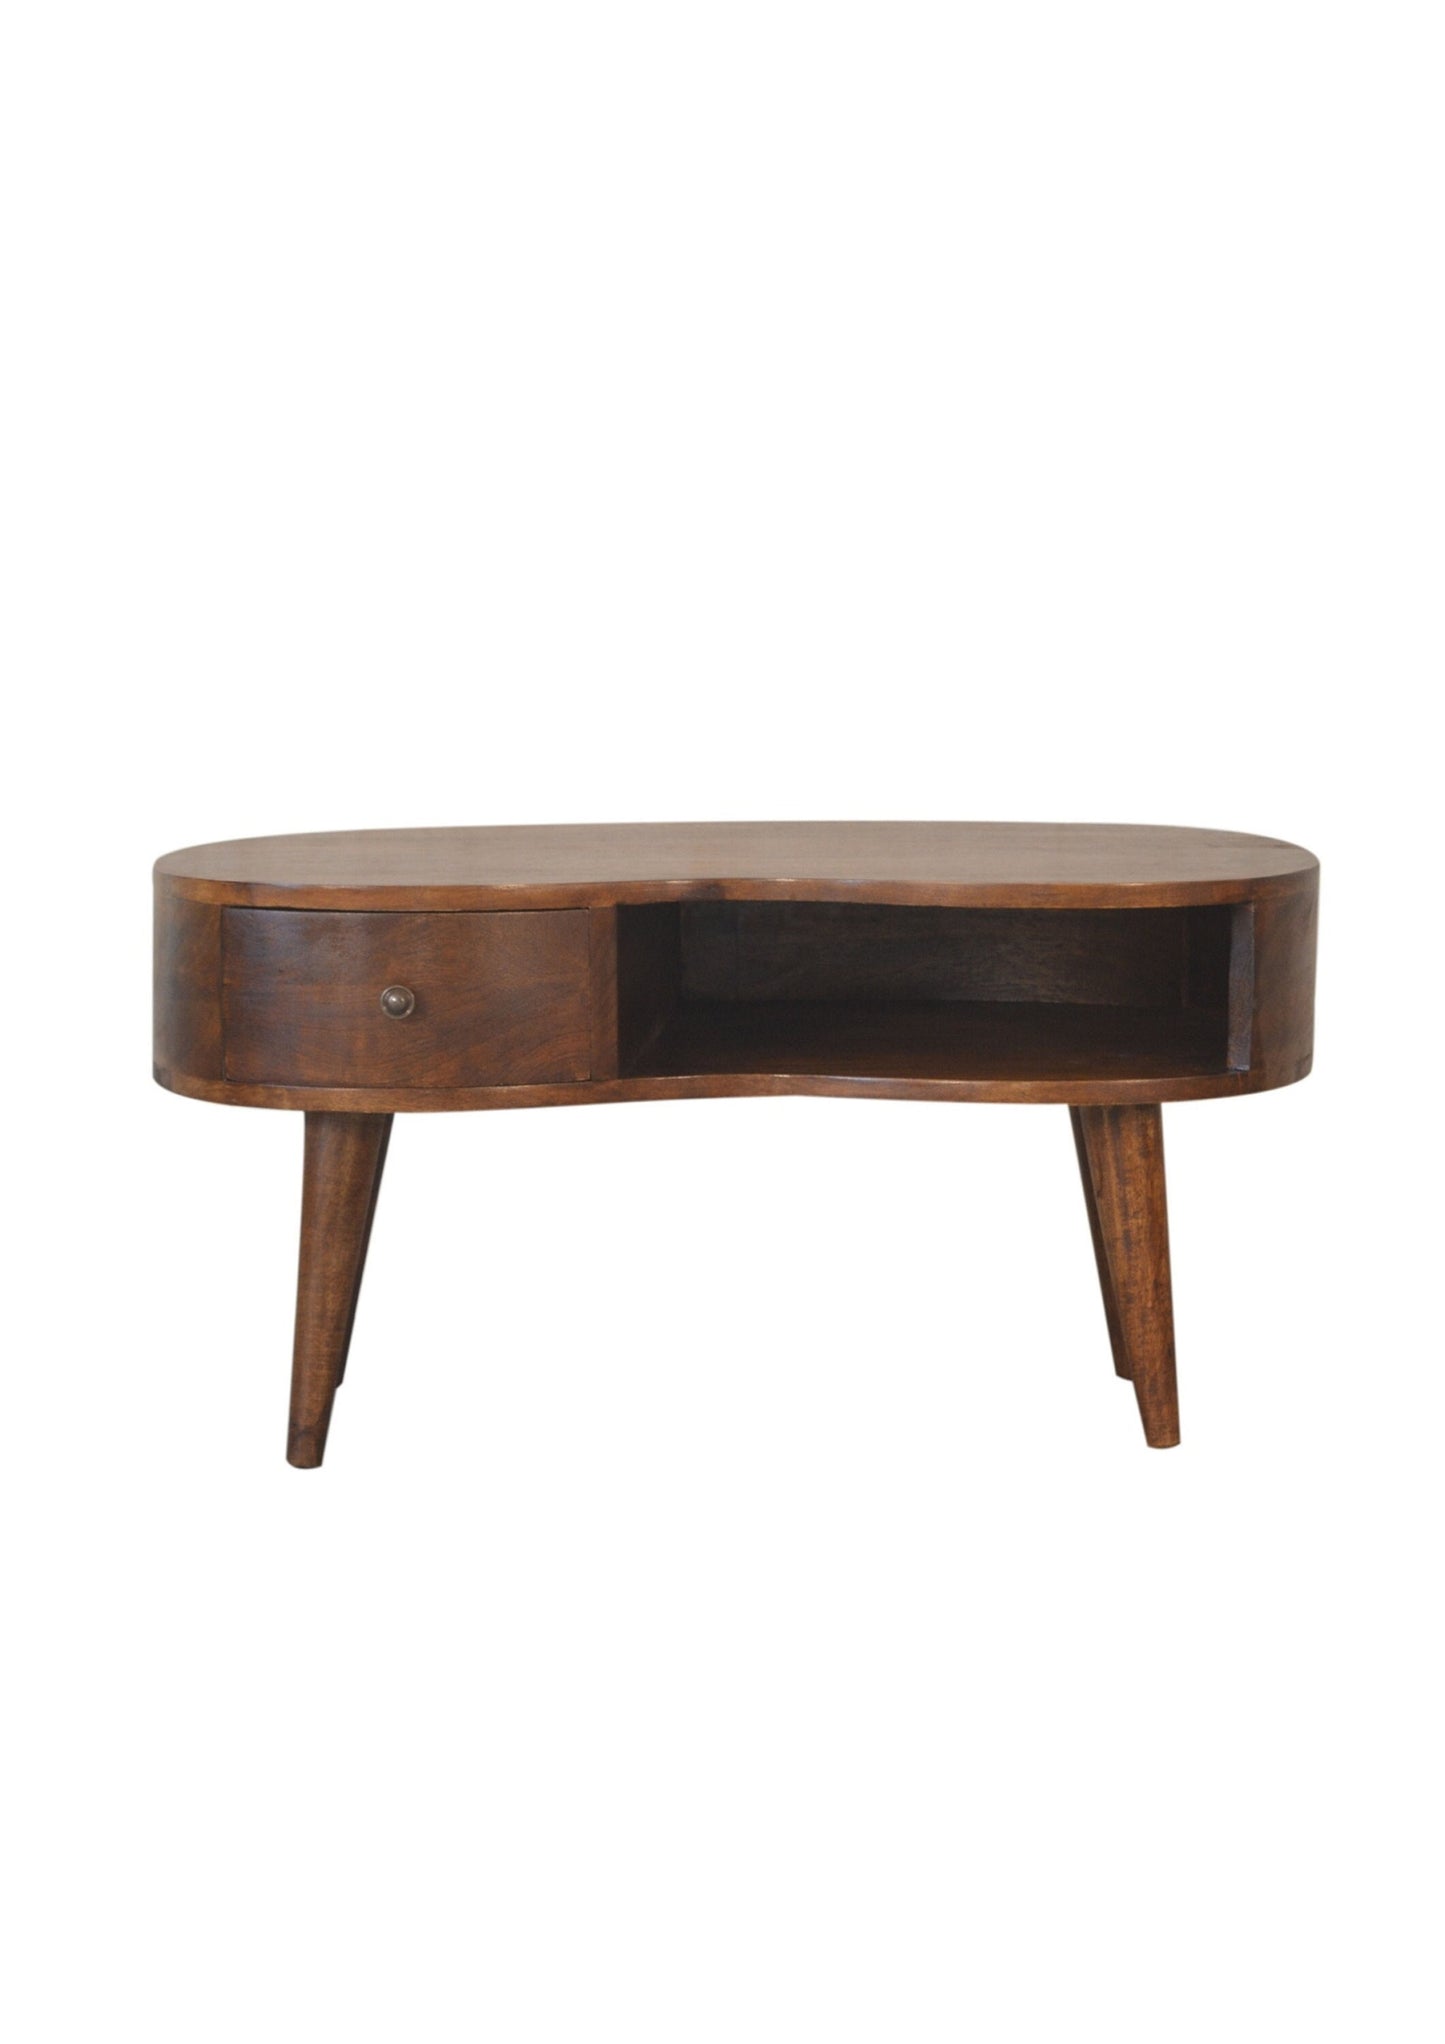 Mid Century Retro Style Curved Solid Wood Chestnut Coffee Table